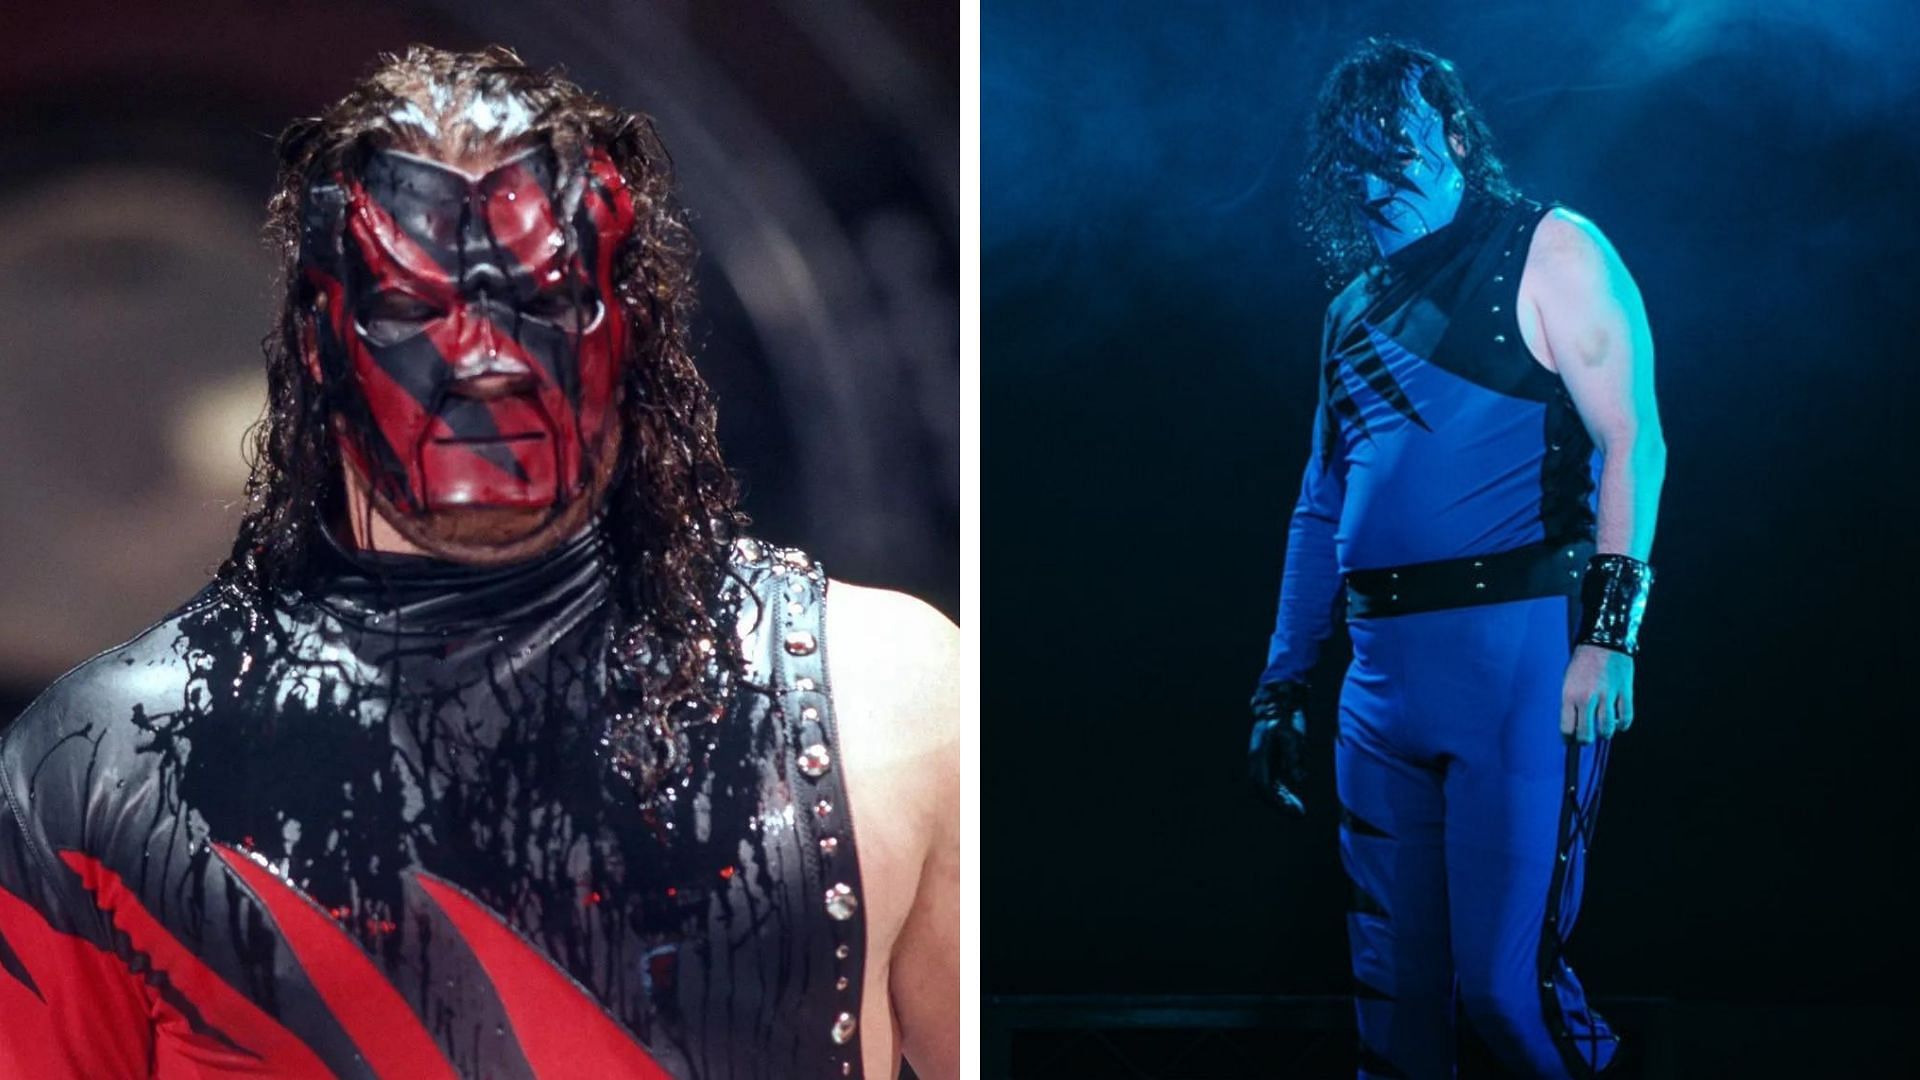 Taking a look at the connections between Kane and Blue Kane